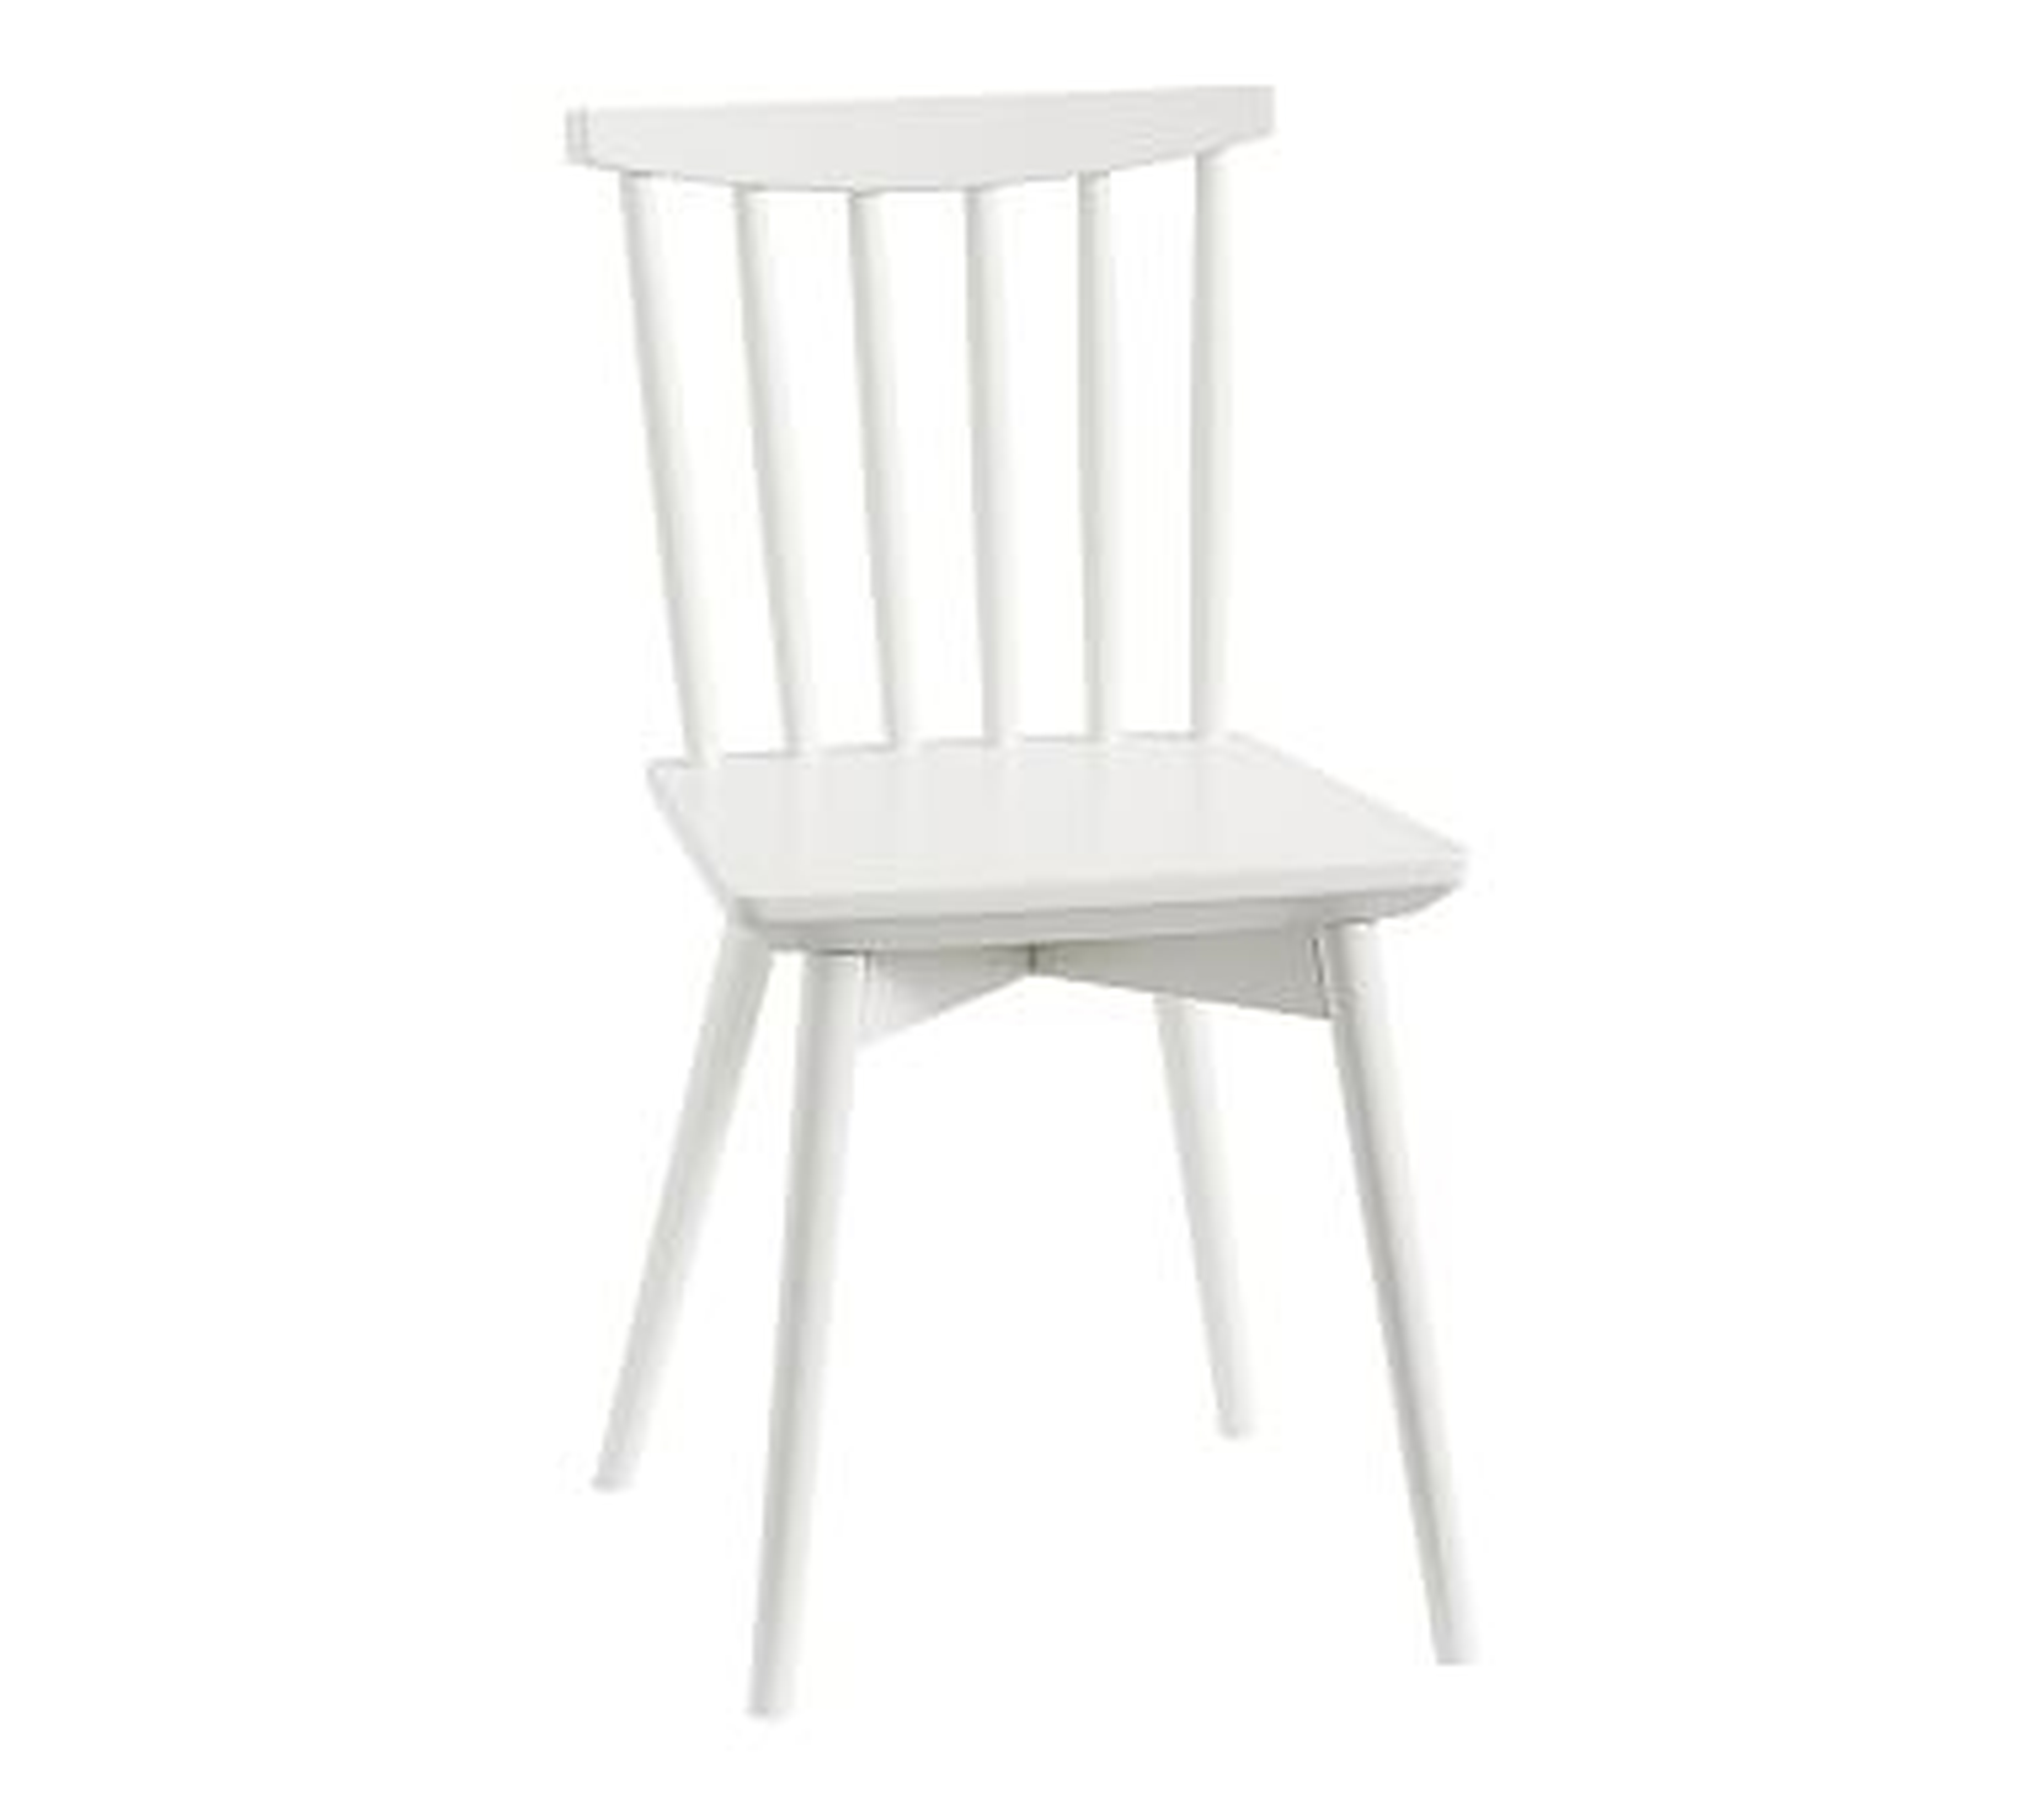 Mid-Century Play Chair, Simply White, UPS - Pottery Barn Kids